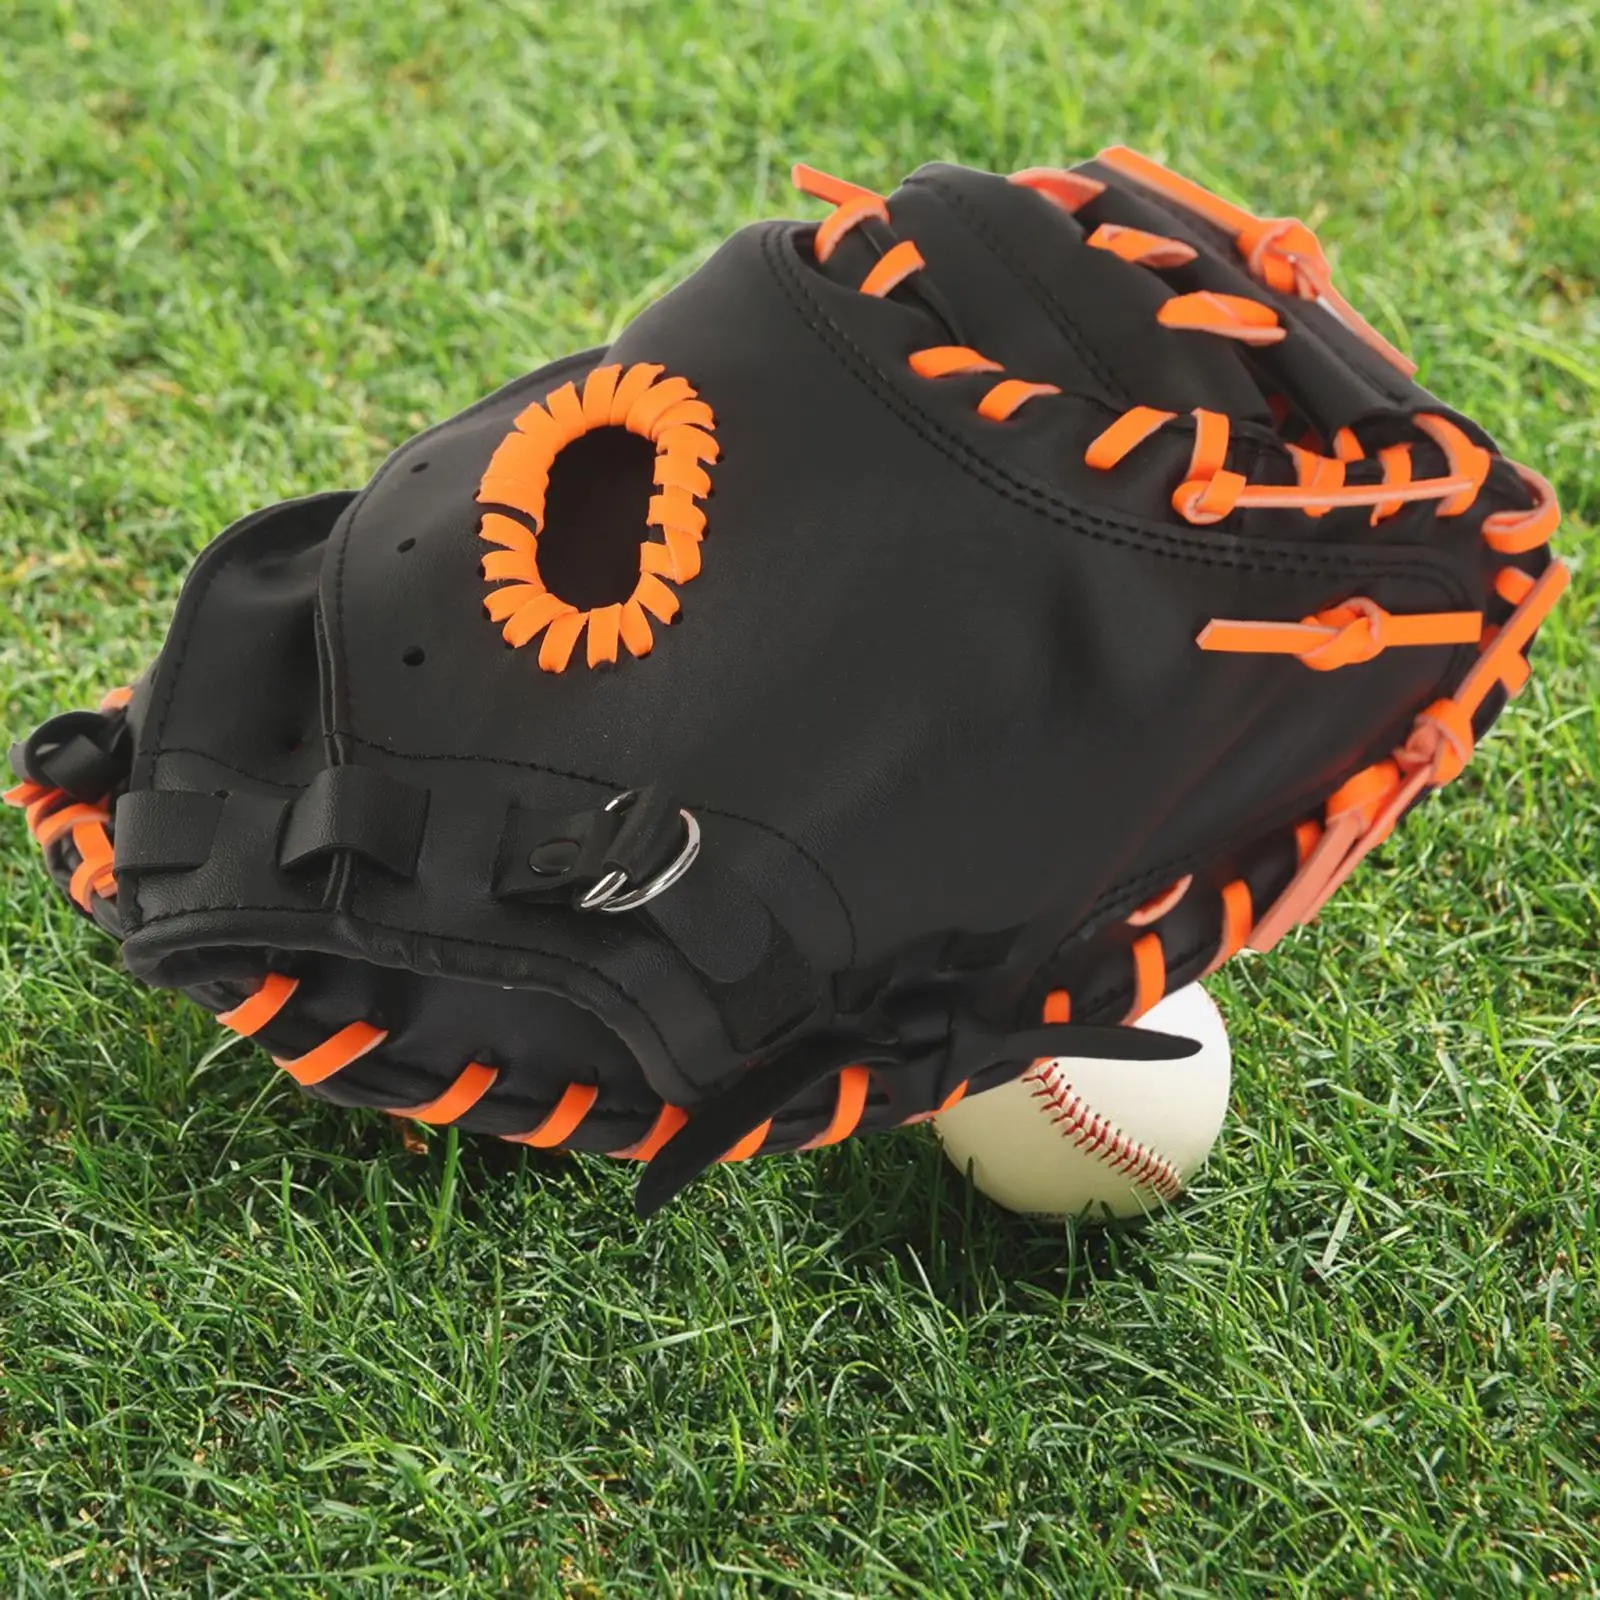 Baseball Glove Durable Comfortable Flexibility Infield Gloves PU Softball Gloves Catcher Mitts for Youth Adult Beginner Exercise